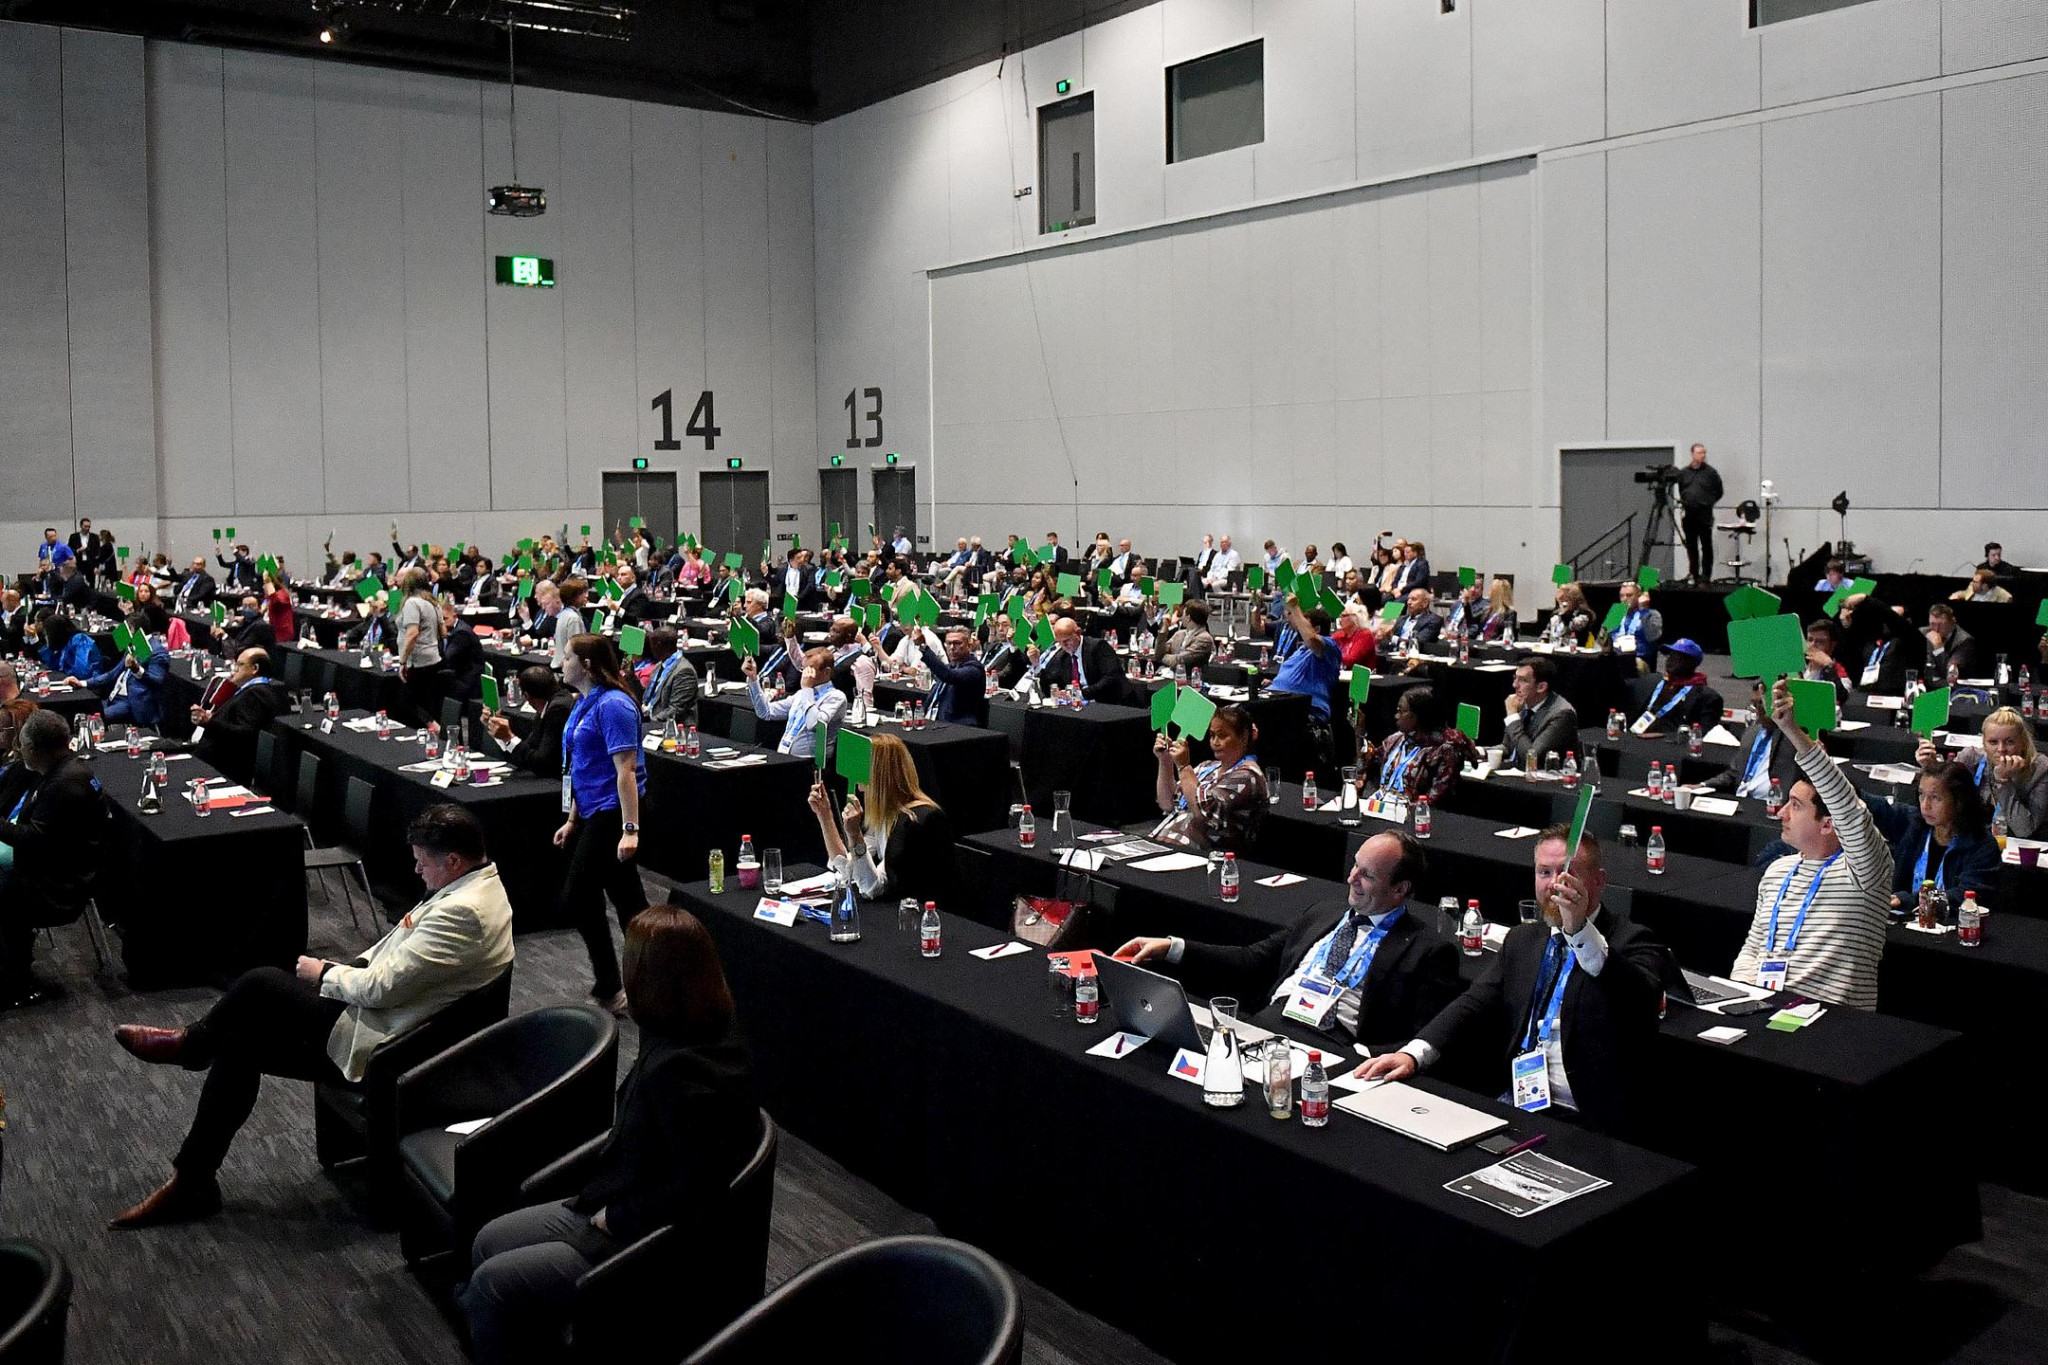 Green bats were raised at the Melbourne Convention and Exhibition Centre as members voted in favour of a new constitution and name change ©FINA